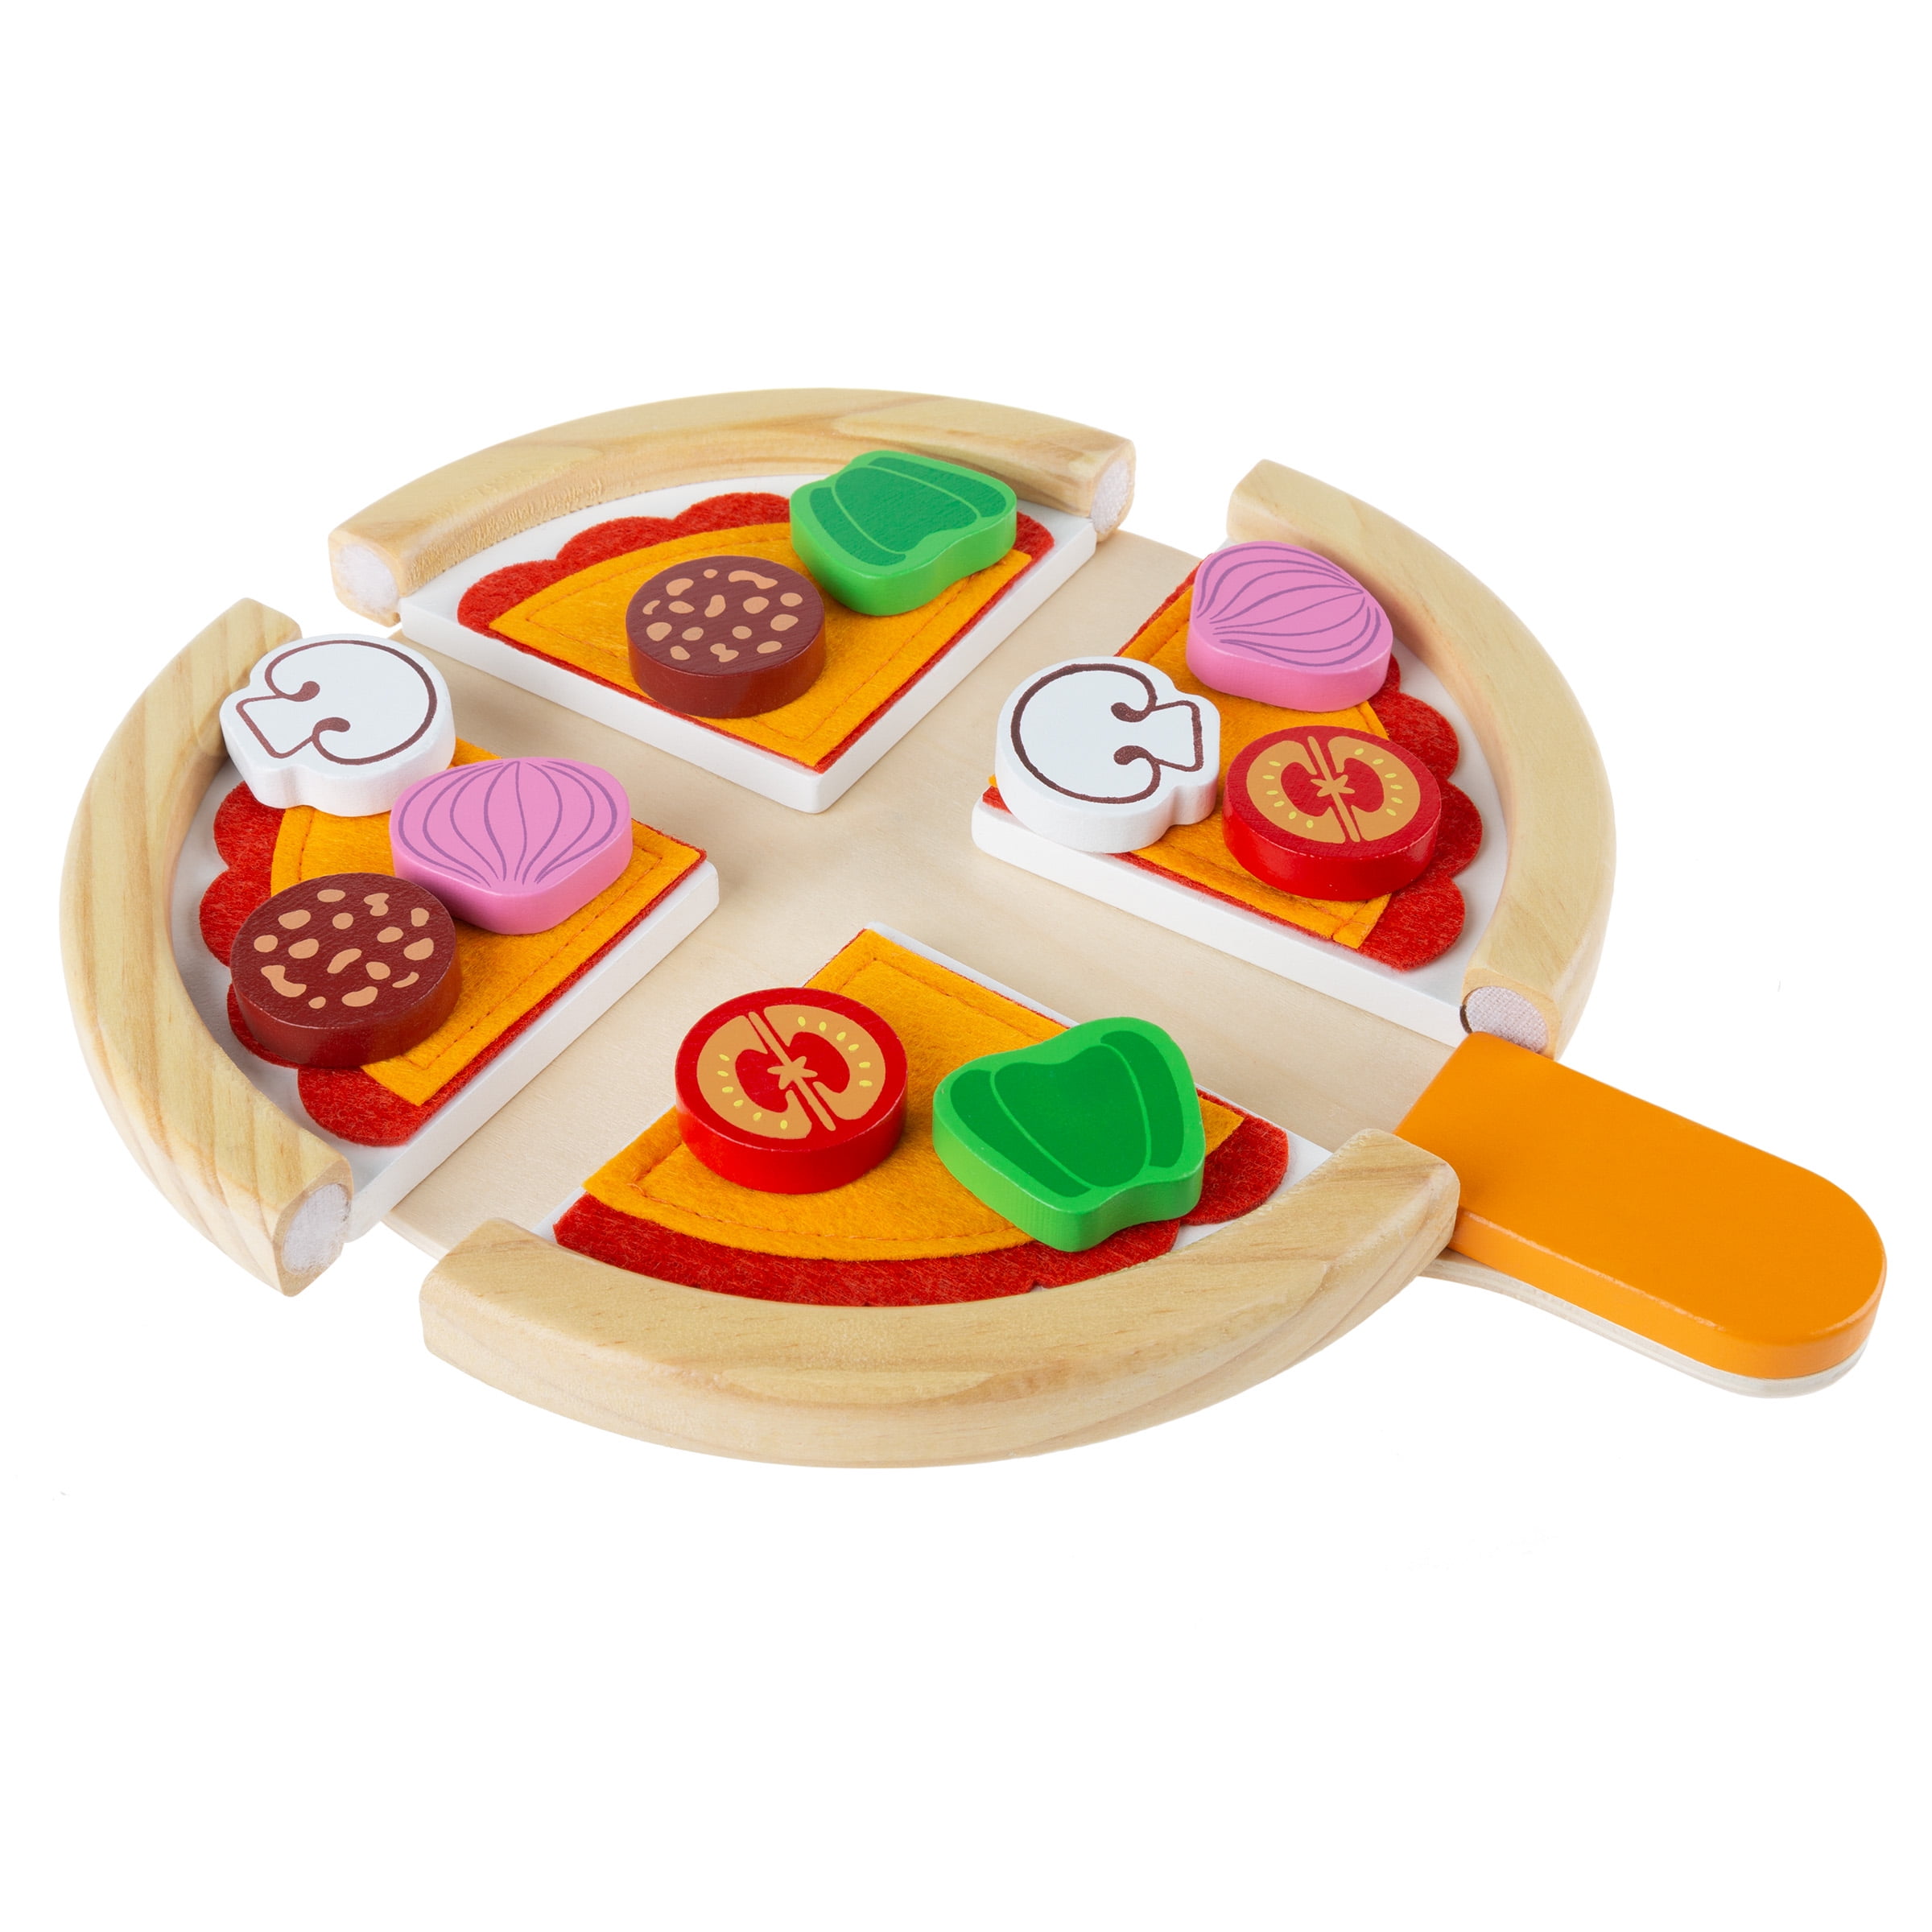 Wooden Pizza Play Food Set With 30 Accessories - Pretend Oven，Food And  Pizza Cutter/ Toy For Kids，Children's Home Games, Kitchen Toys,Birthday  Gift Fo